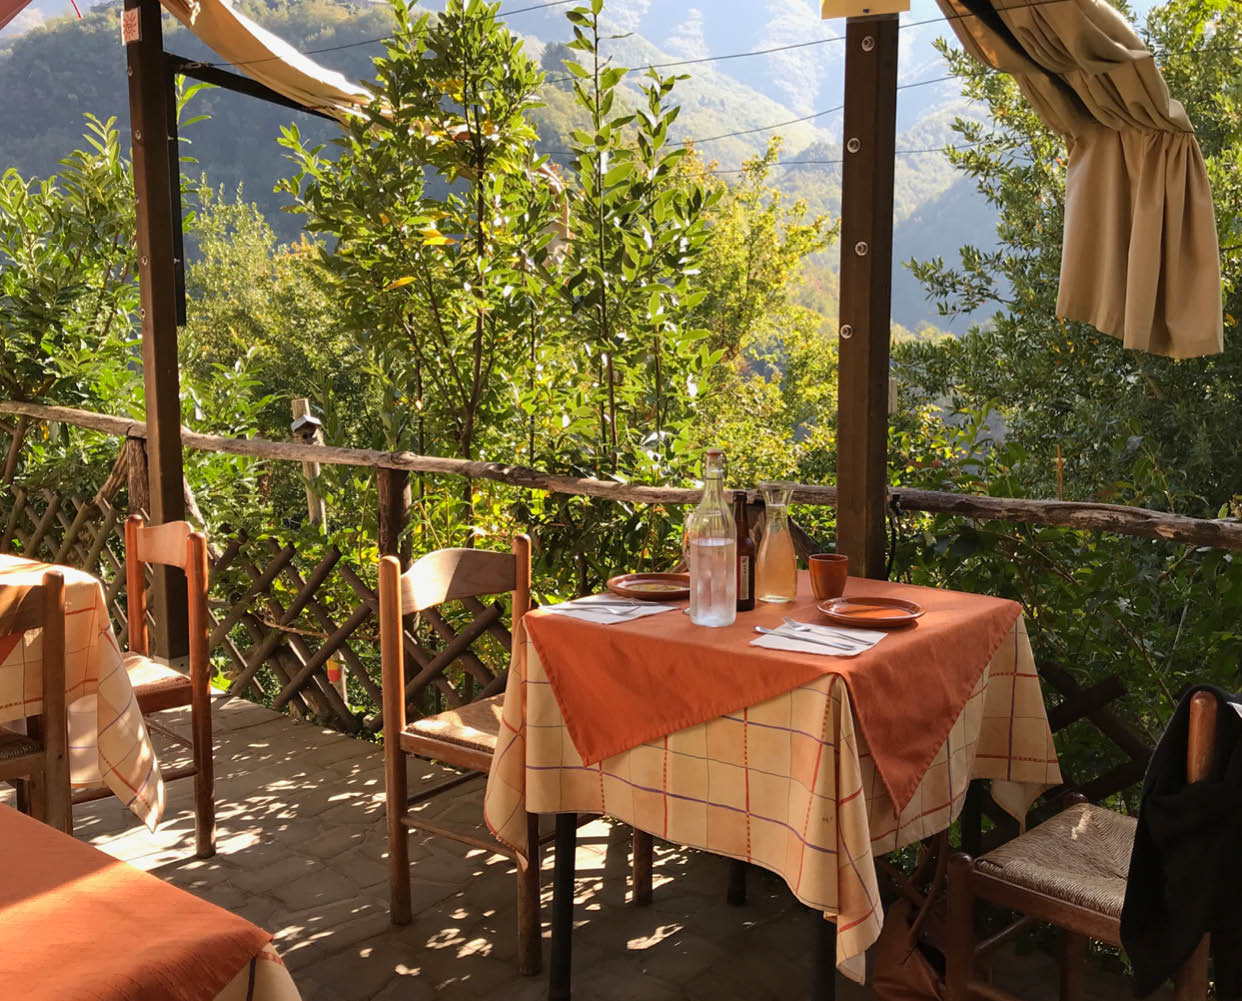 This self-sustained Tuscan restaurant will be worth it